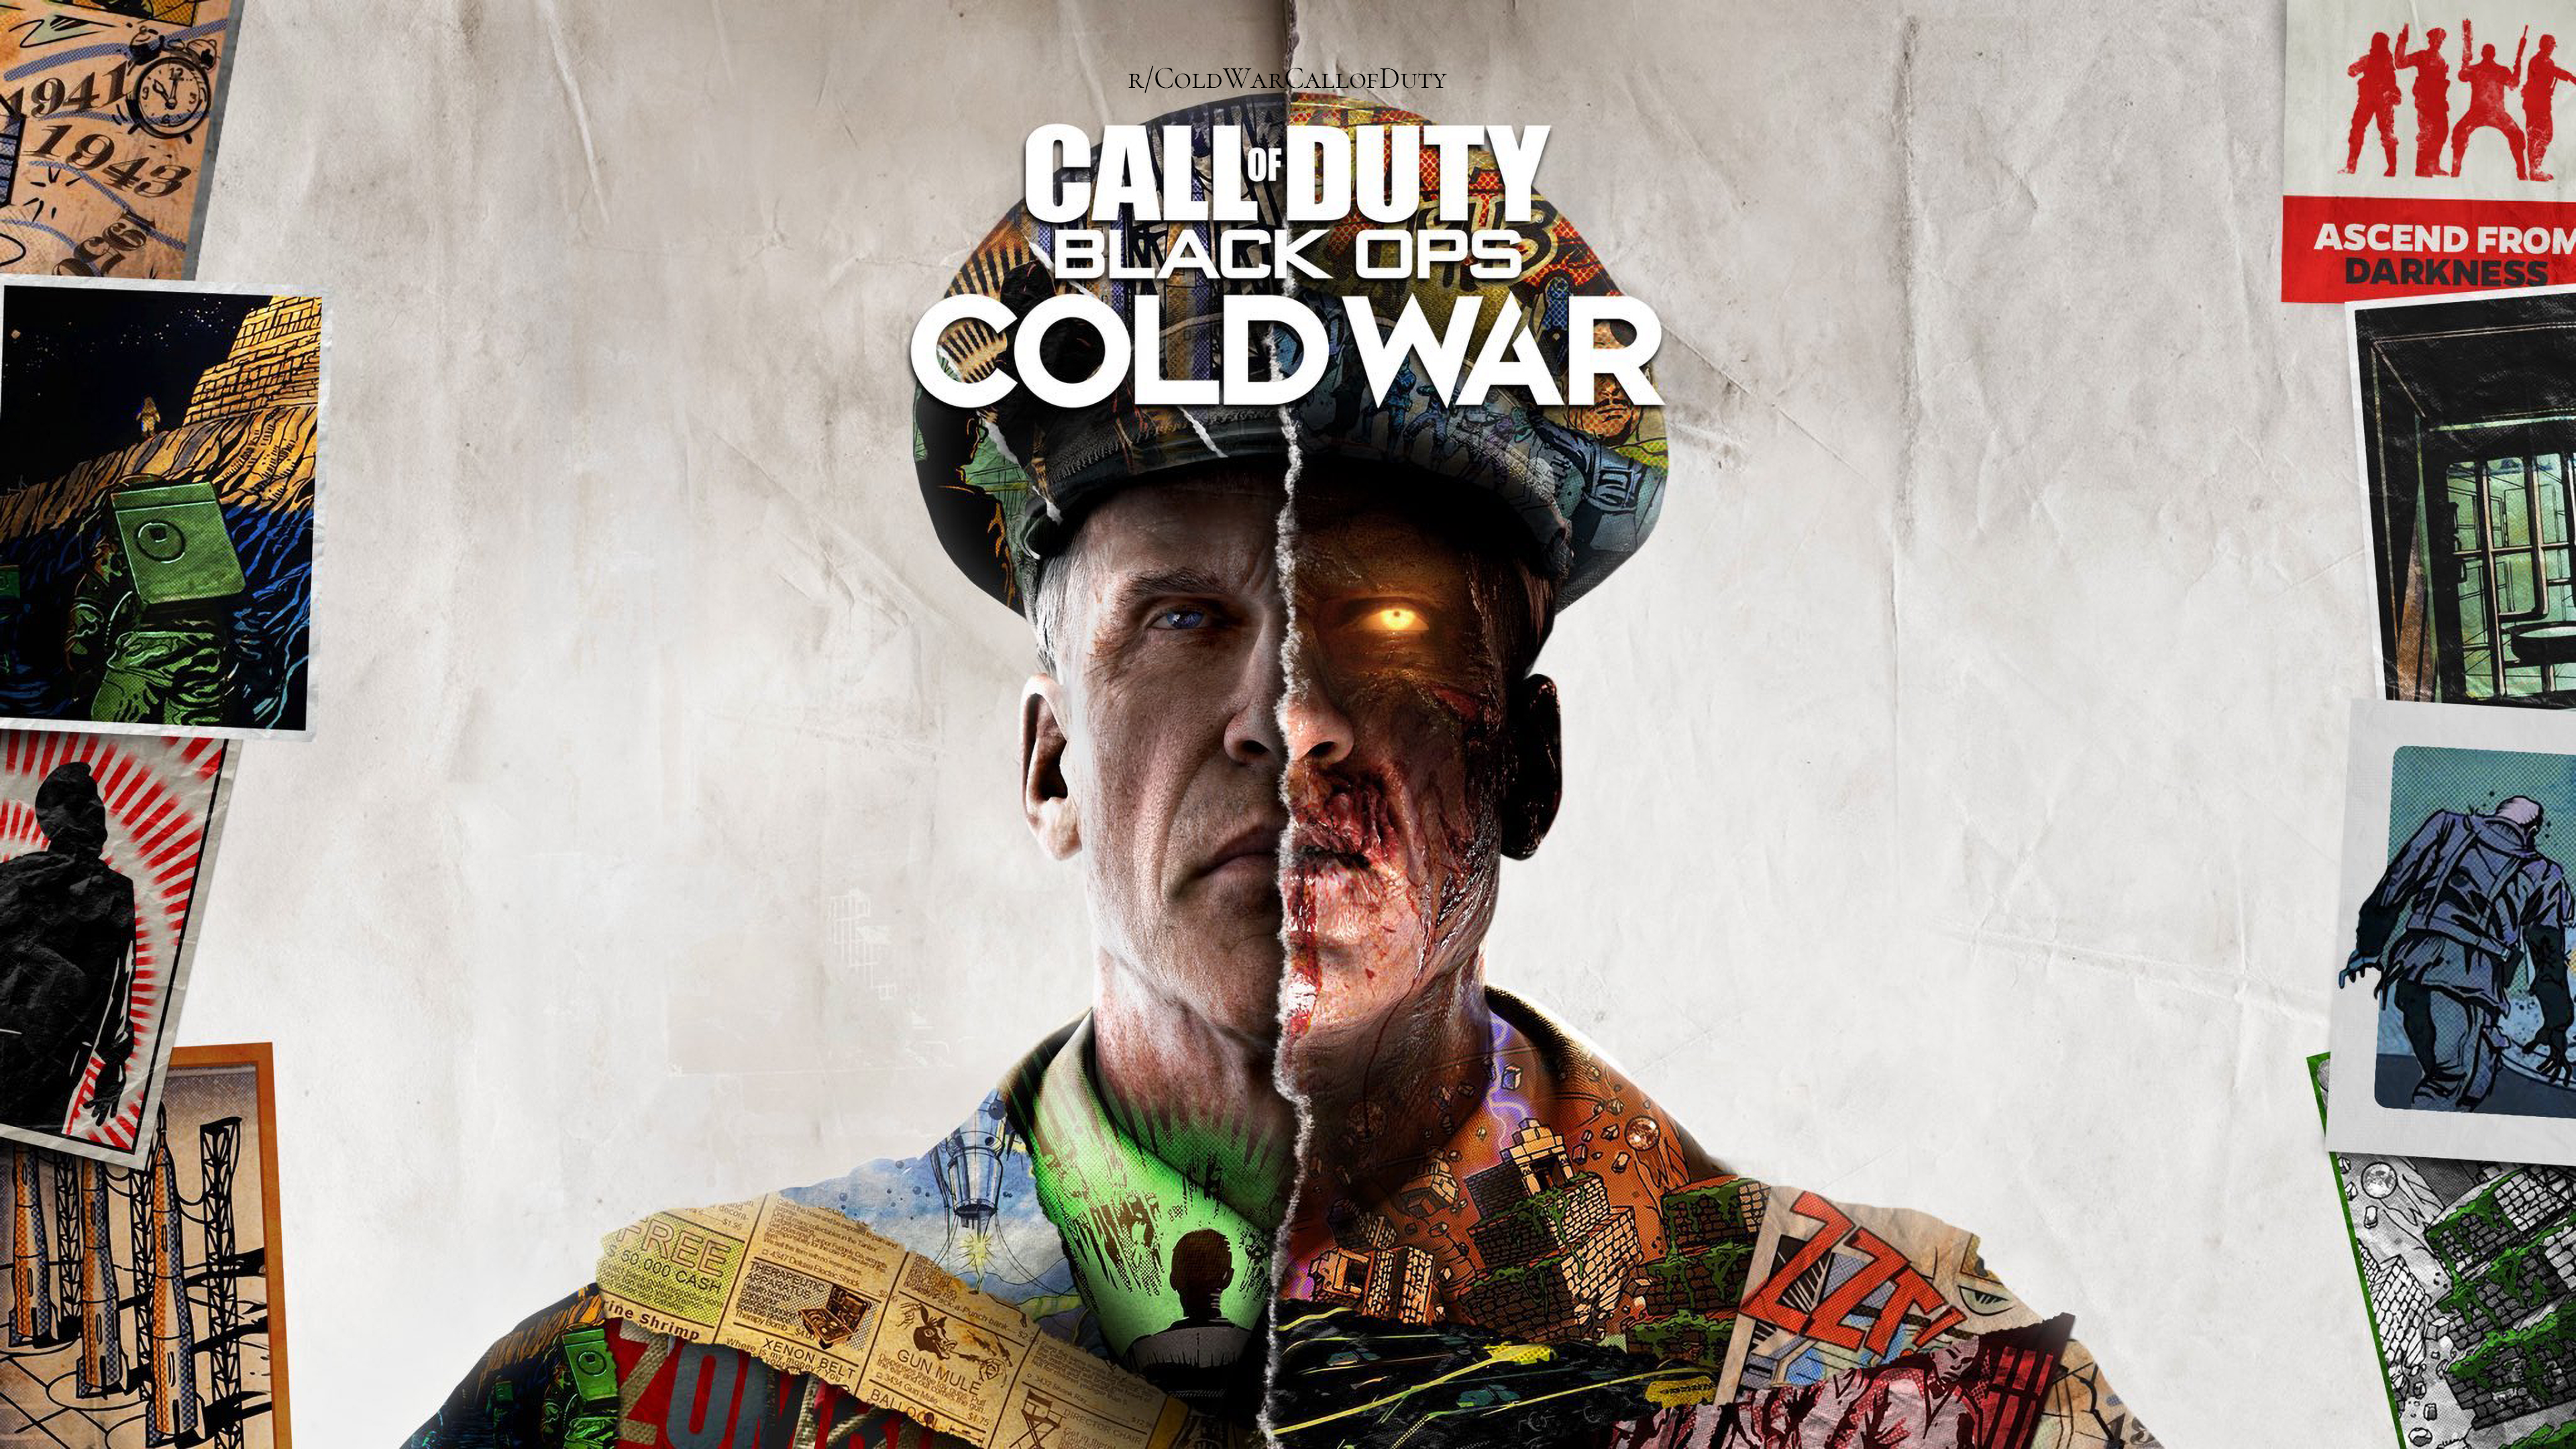 Exclusive R COLDWARCallofDuty Call Of Duty Black Ops: COLD WAR Zombies Wallpaper!